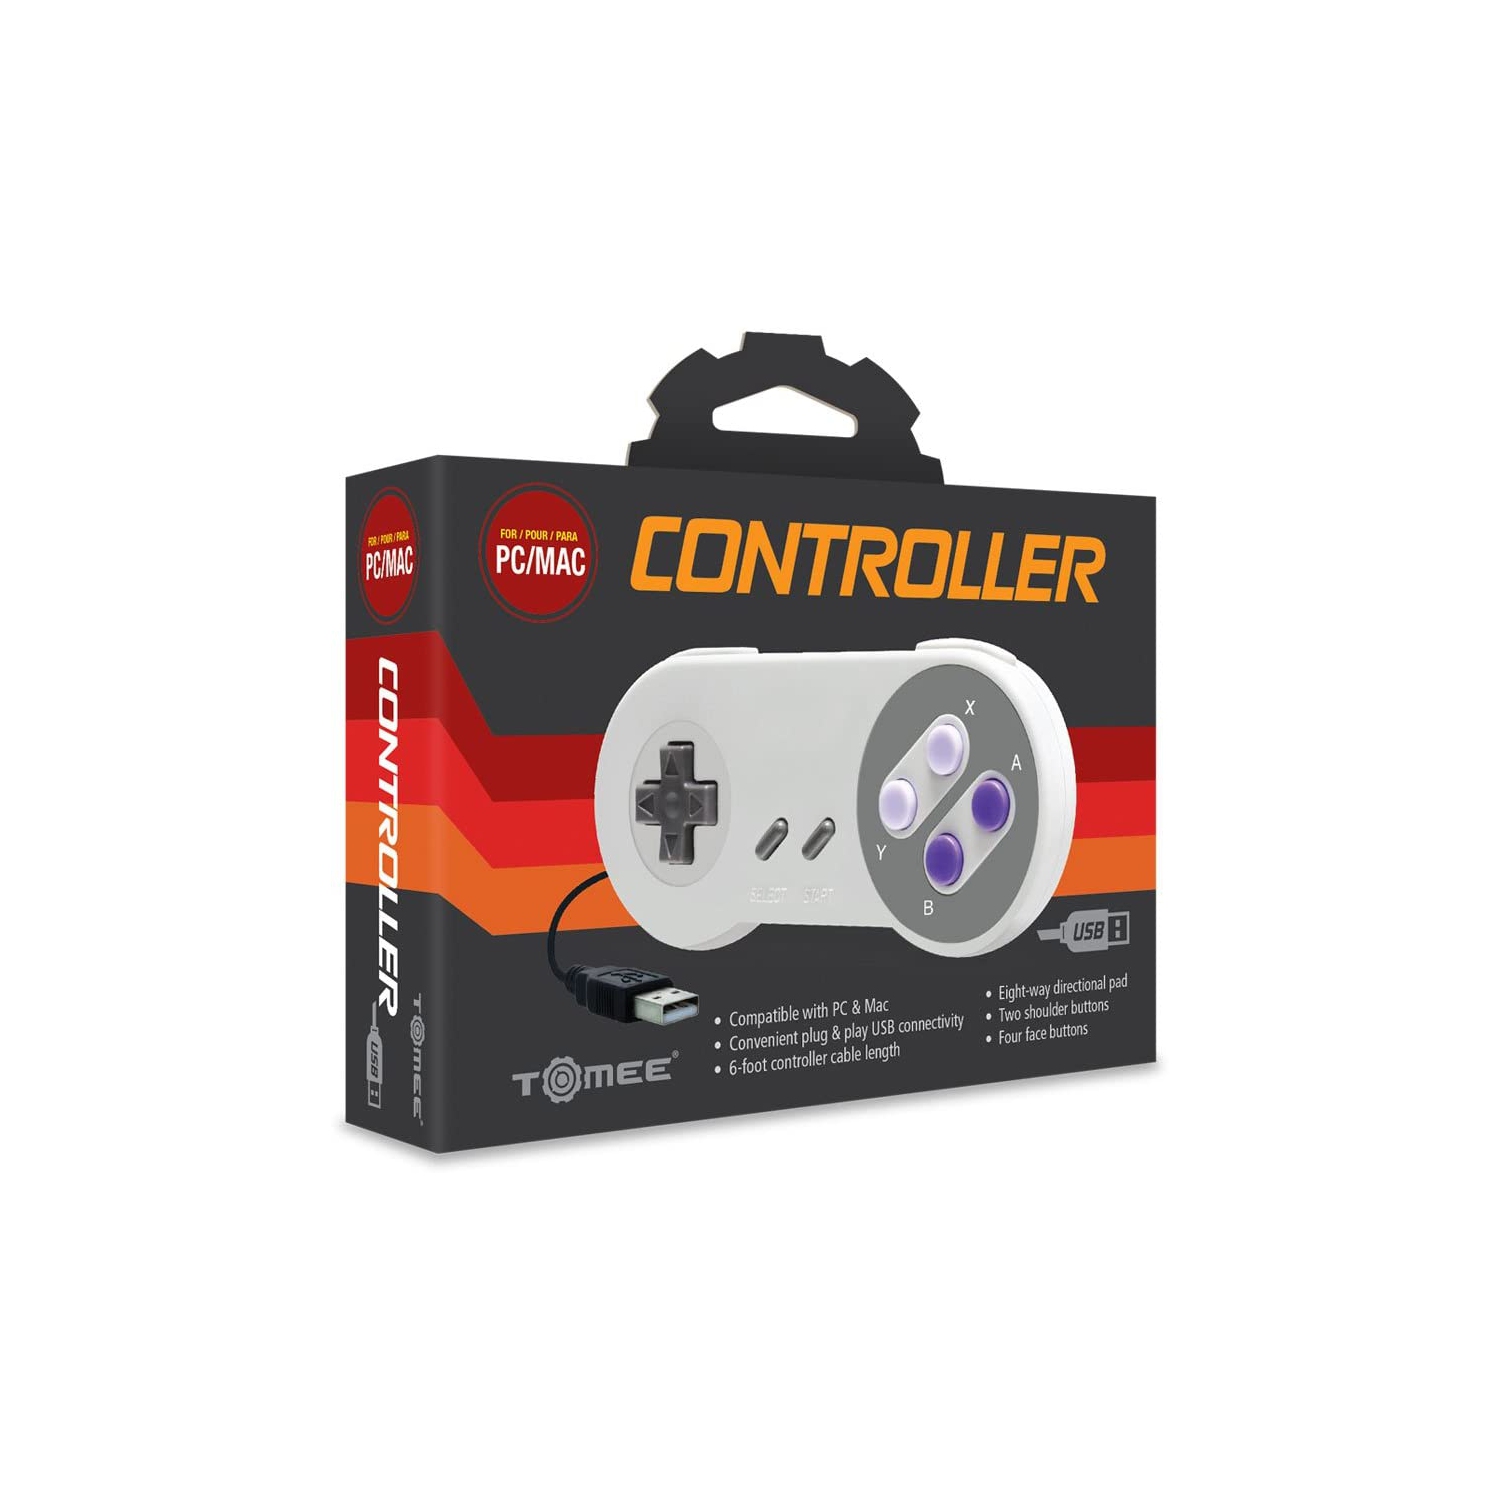 CONTROLLER SNES USB ONLY FOR PC AND MACTOMEE